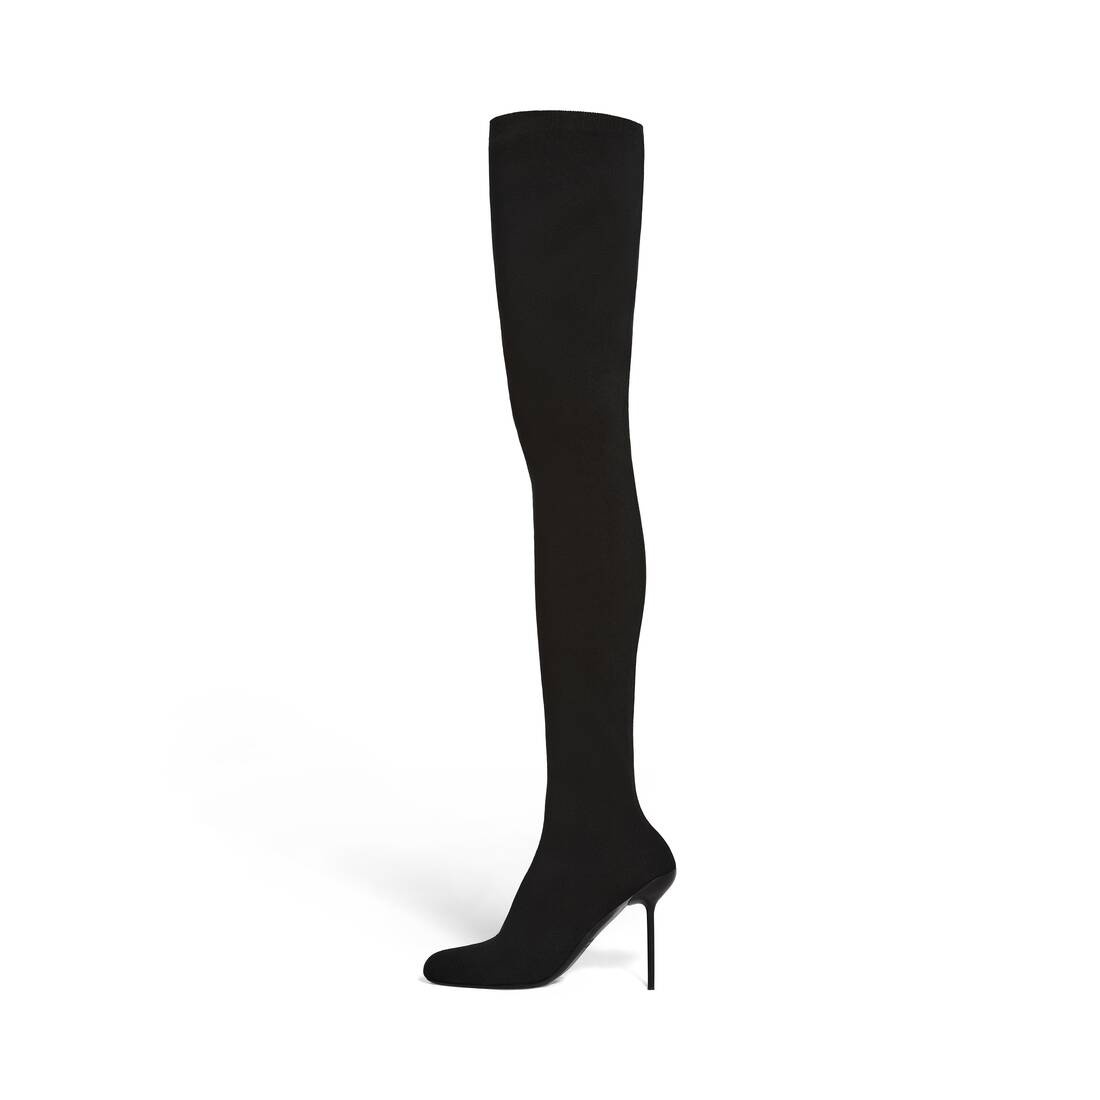 Women's Anatomic 110mm Over-the-knee Boot in Black - 4